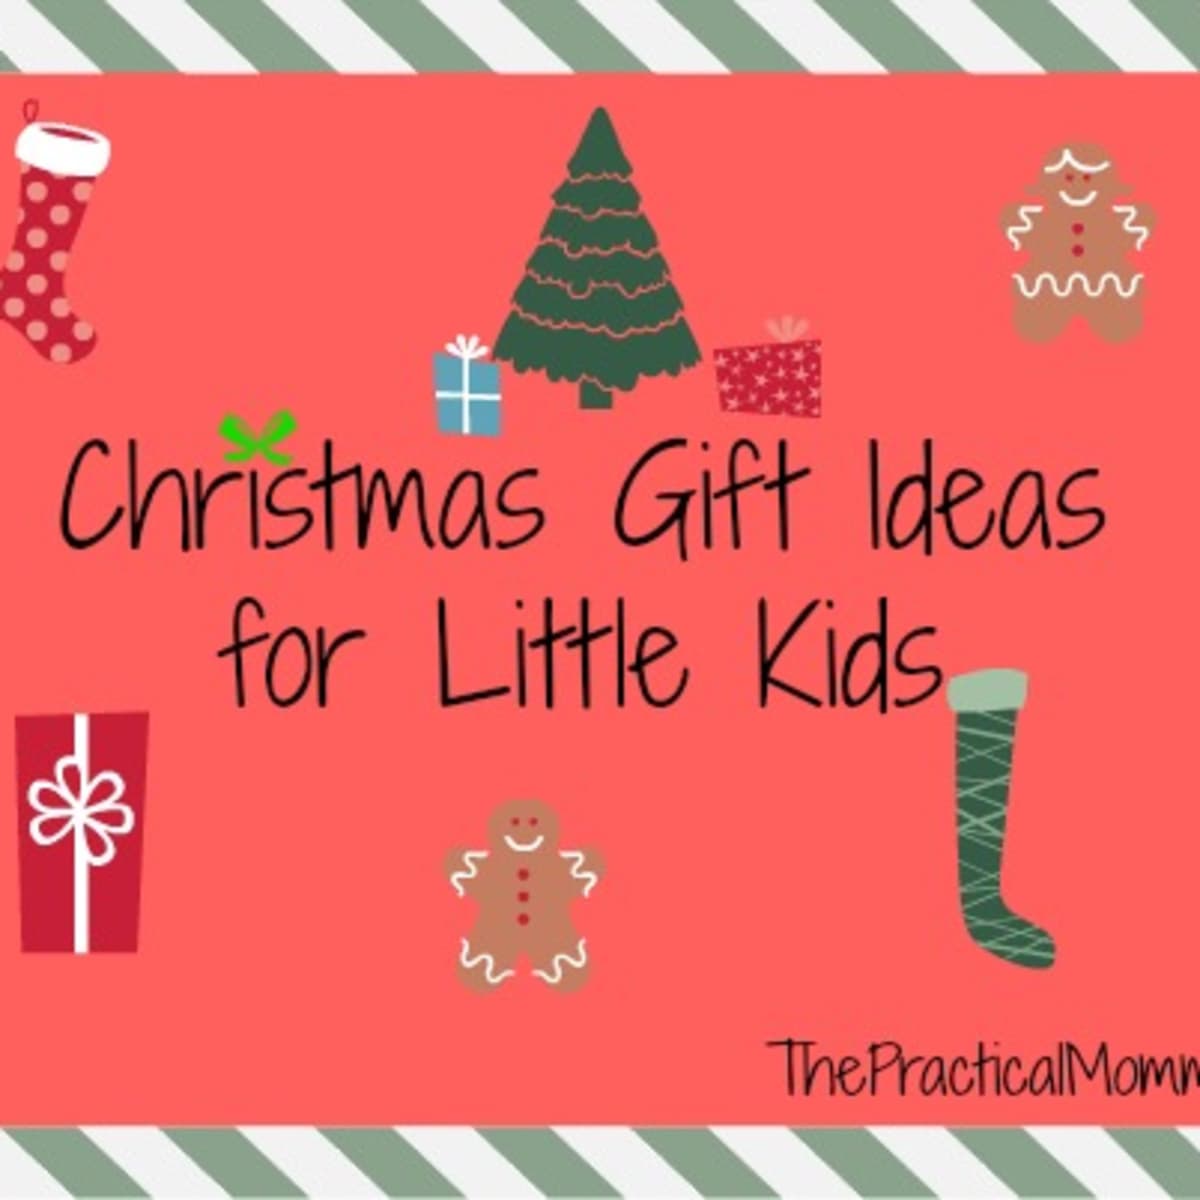 Best Gifts for 16 Year Old Girls - Christmas and Birthday Present Ideas -  HubPages